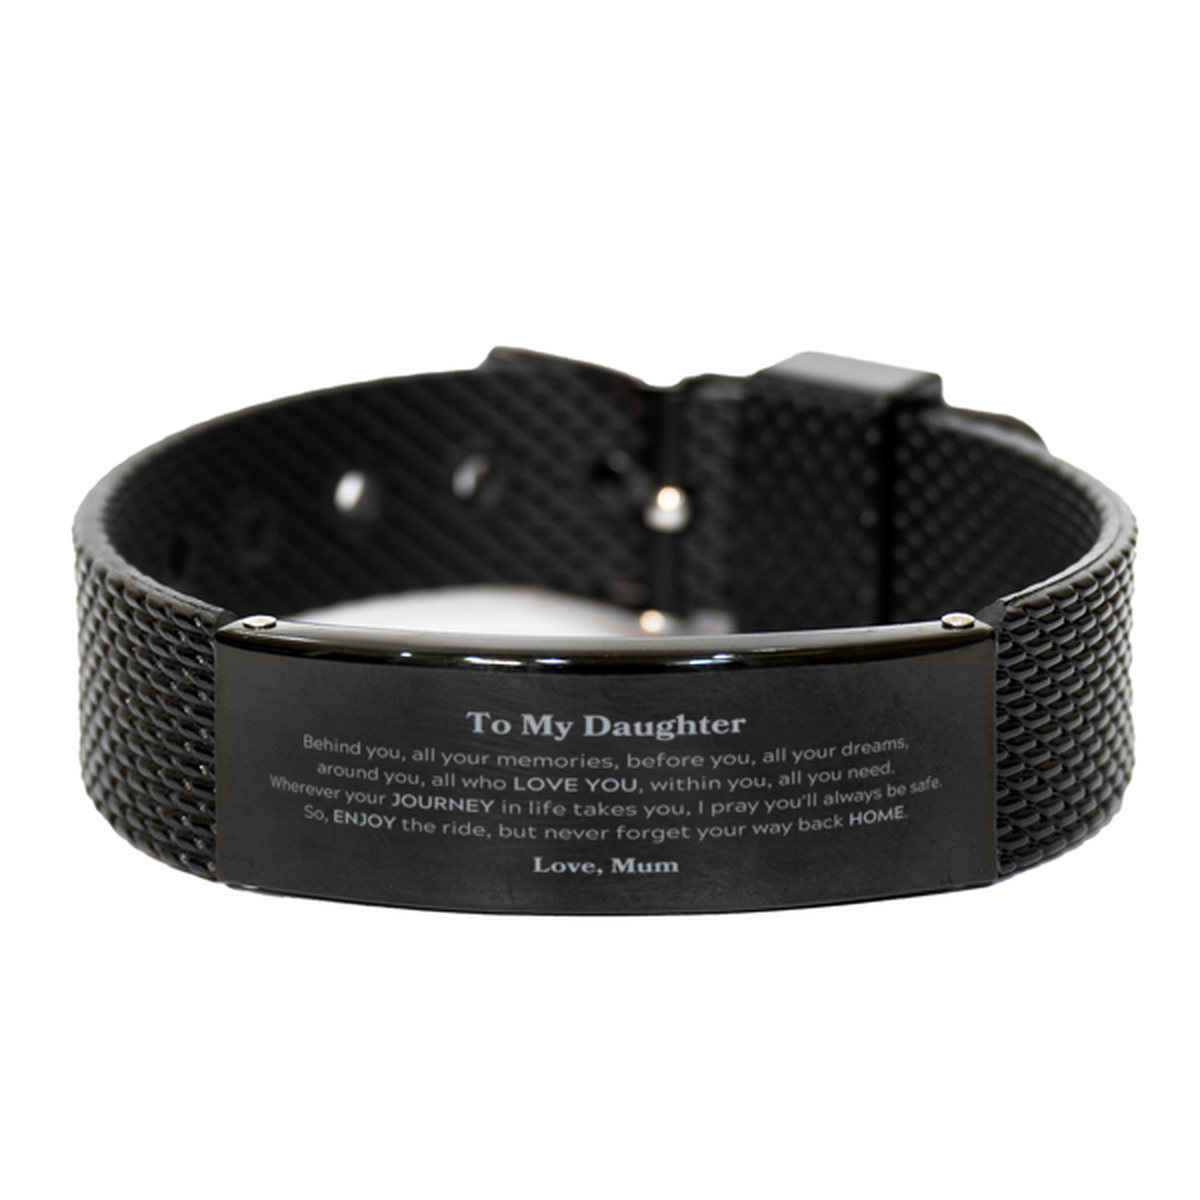 To My Daughter Graduation Gifts from Mum, Daughter Black Shark Mesh Bracelet Christmas Birthday Gifts for Daughter Behind you, all your memories, before you, all your dreams. Love, Mum